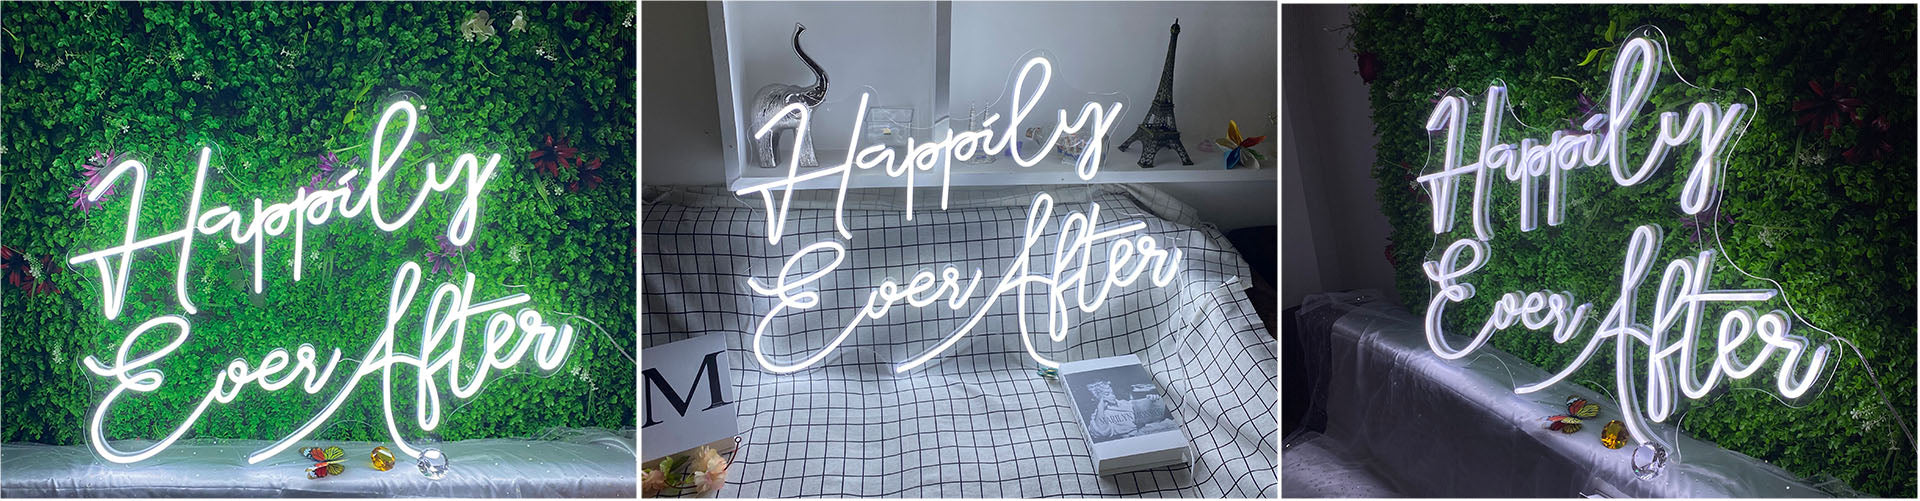 happily ever after neon light sign